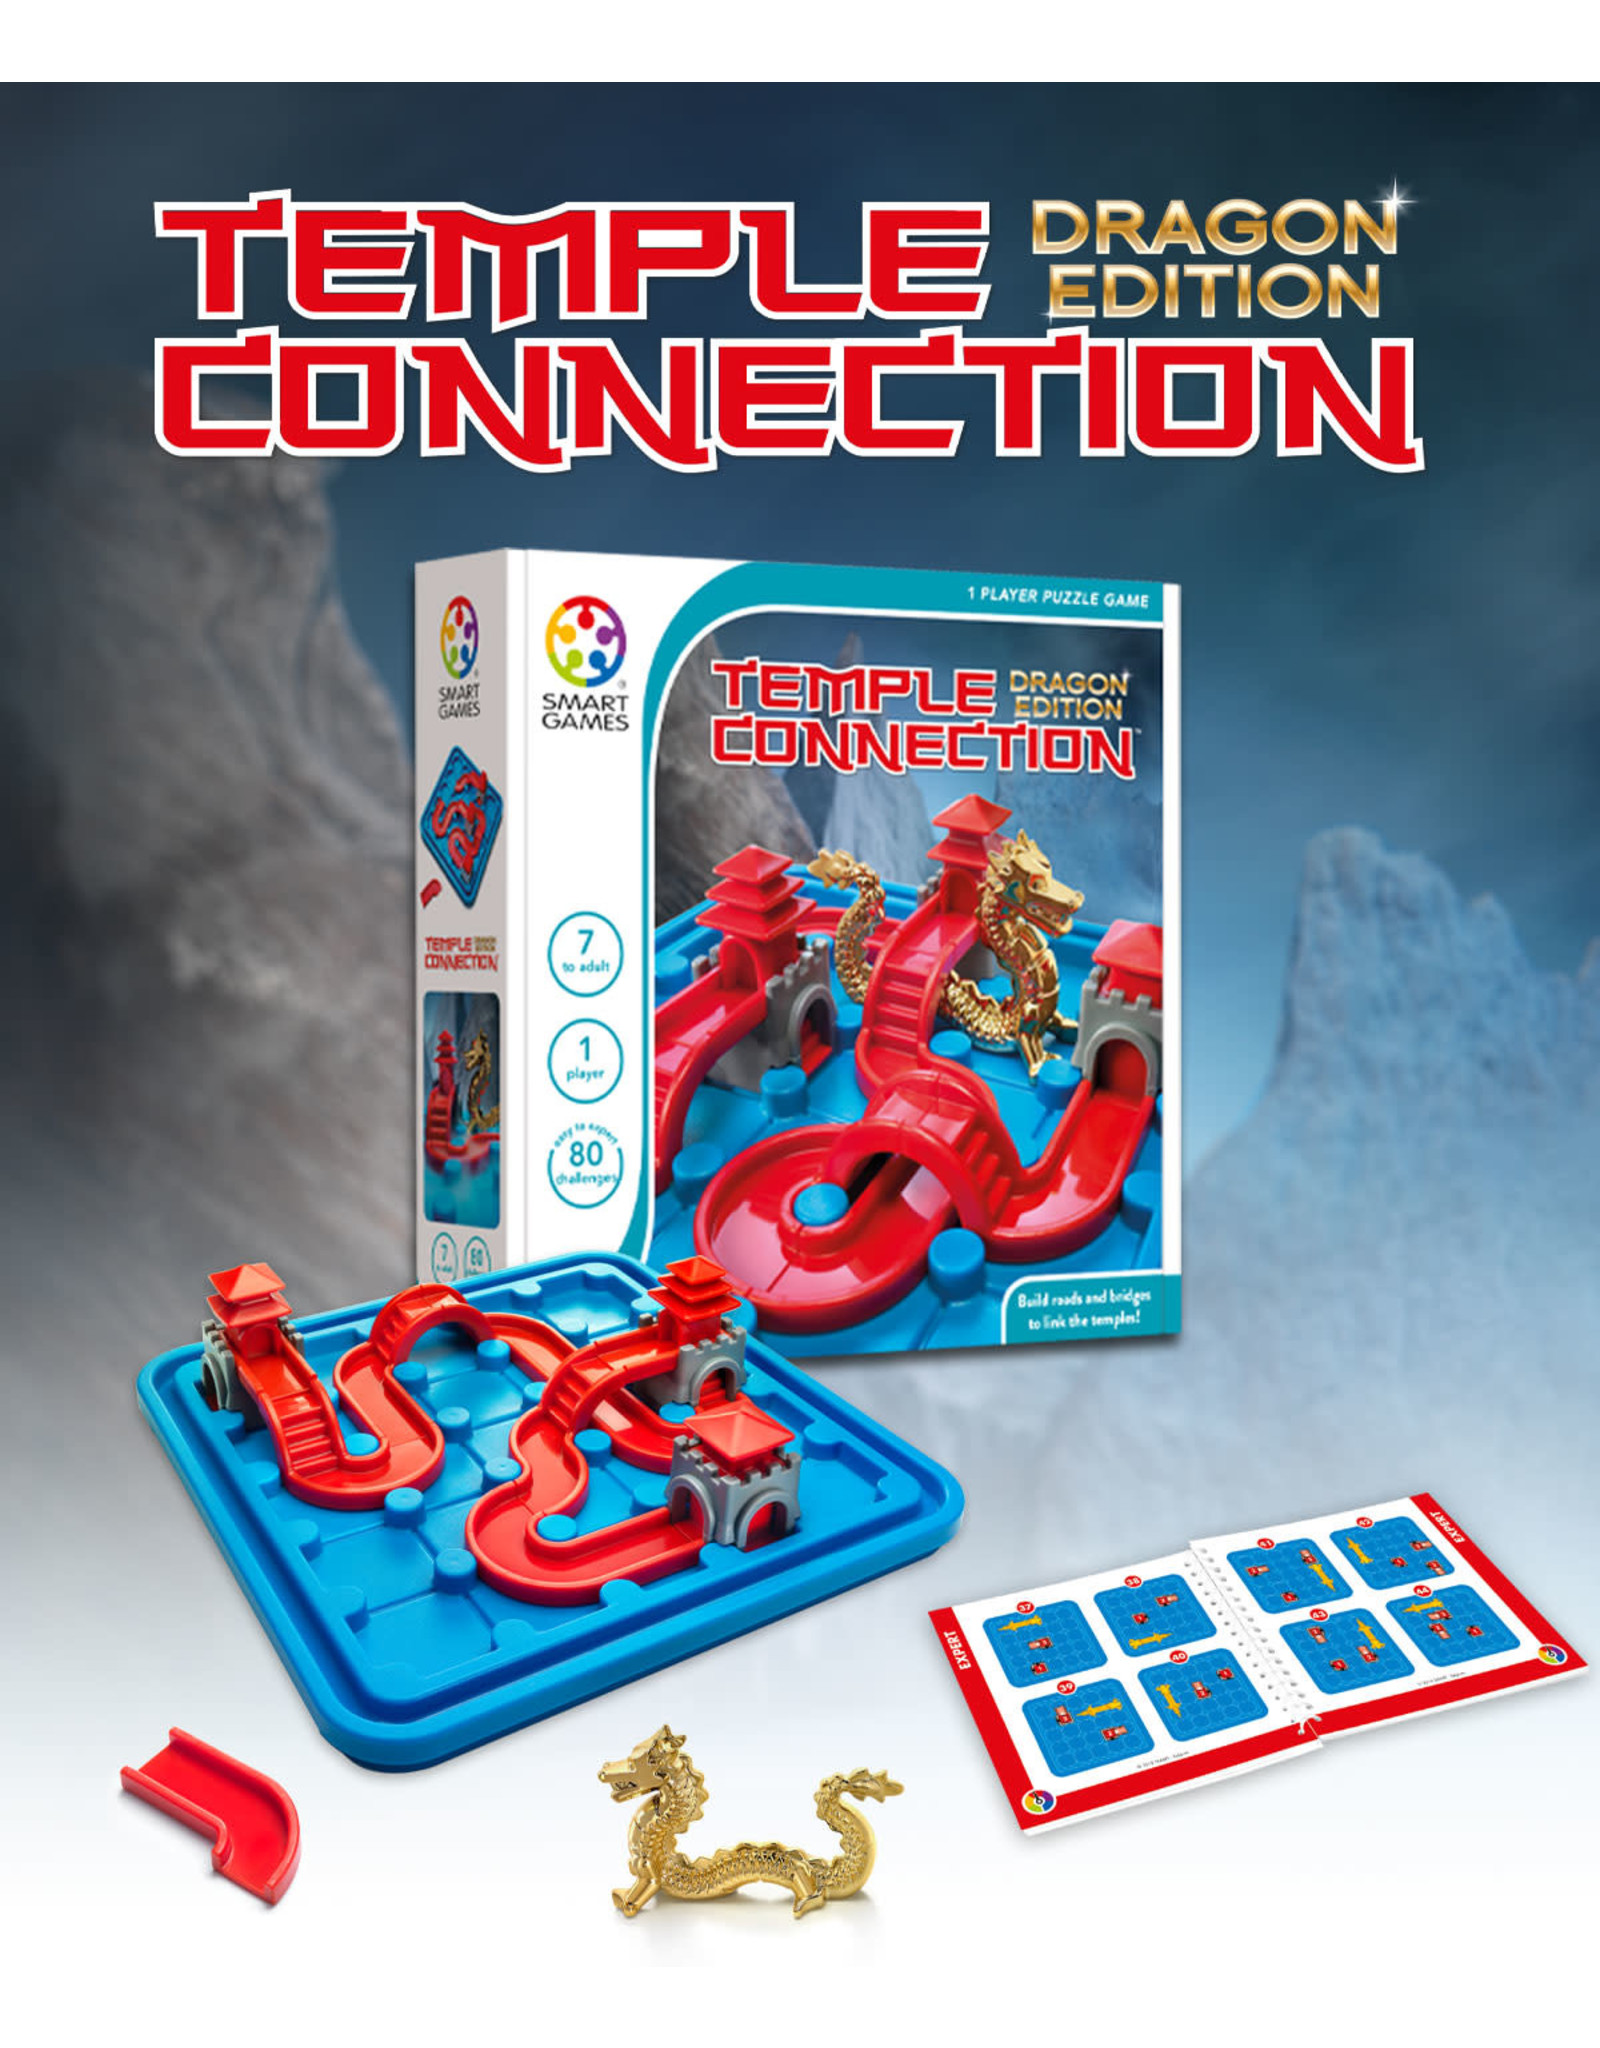 SmartGames Smart Games Classic - Temple Connection Dragon Edition